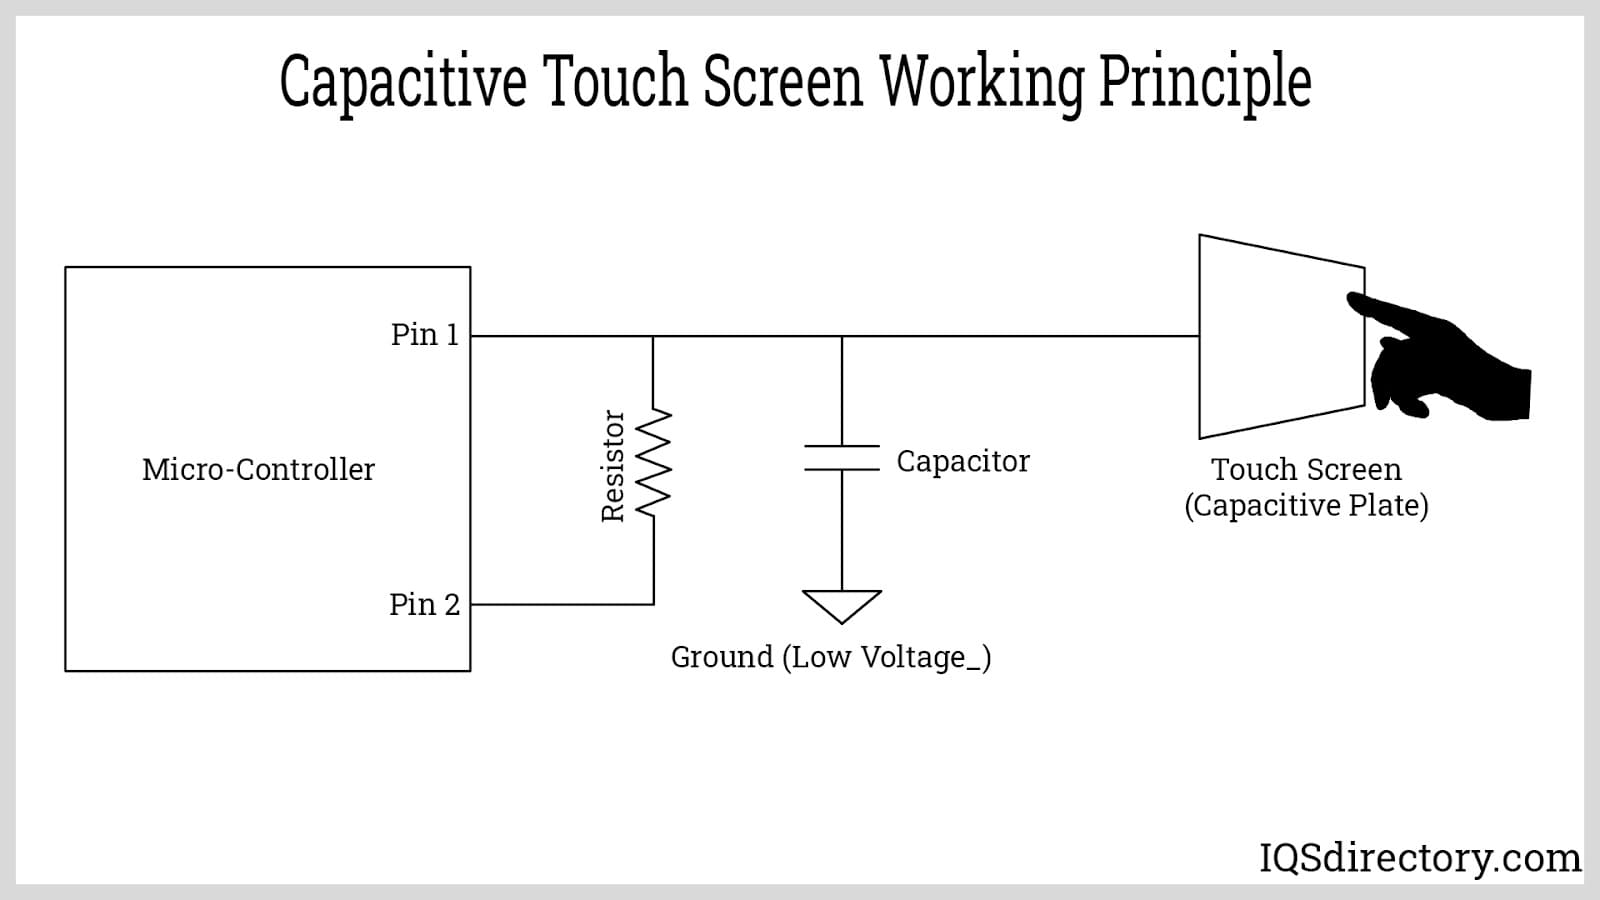 Capacitive Touch Screen Working Principle